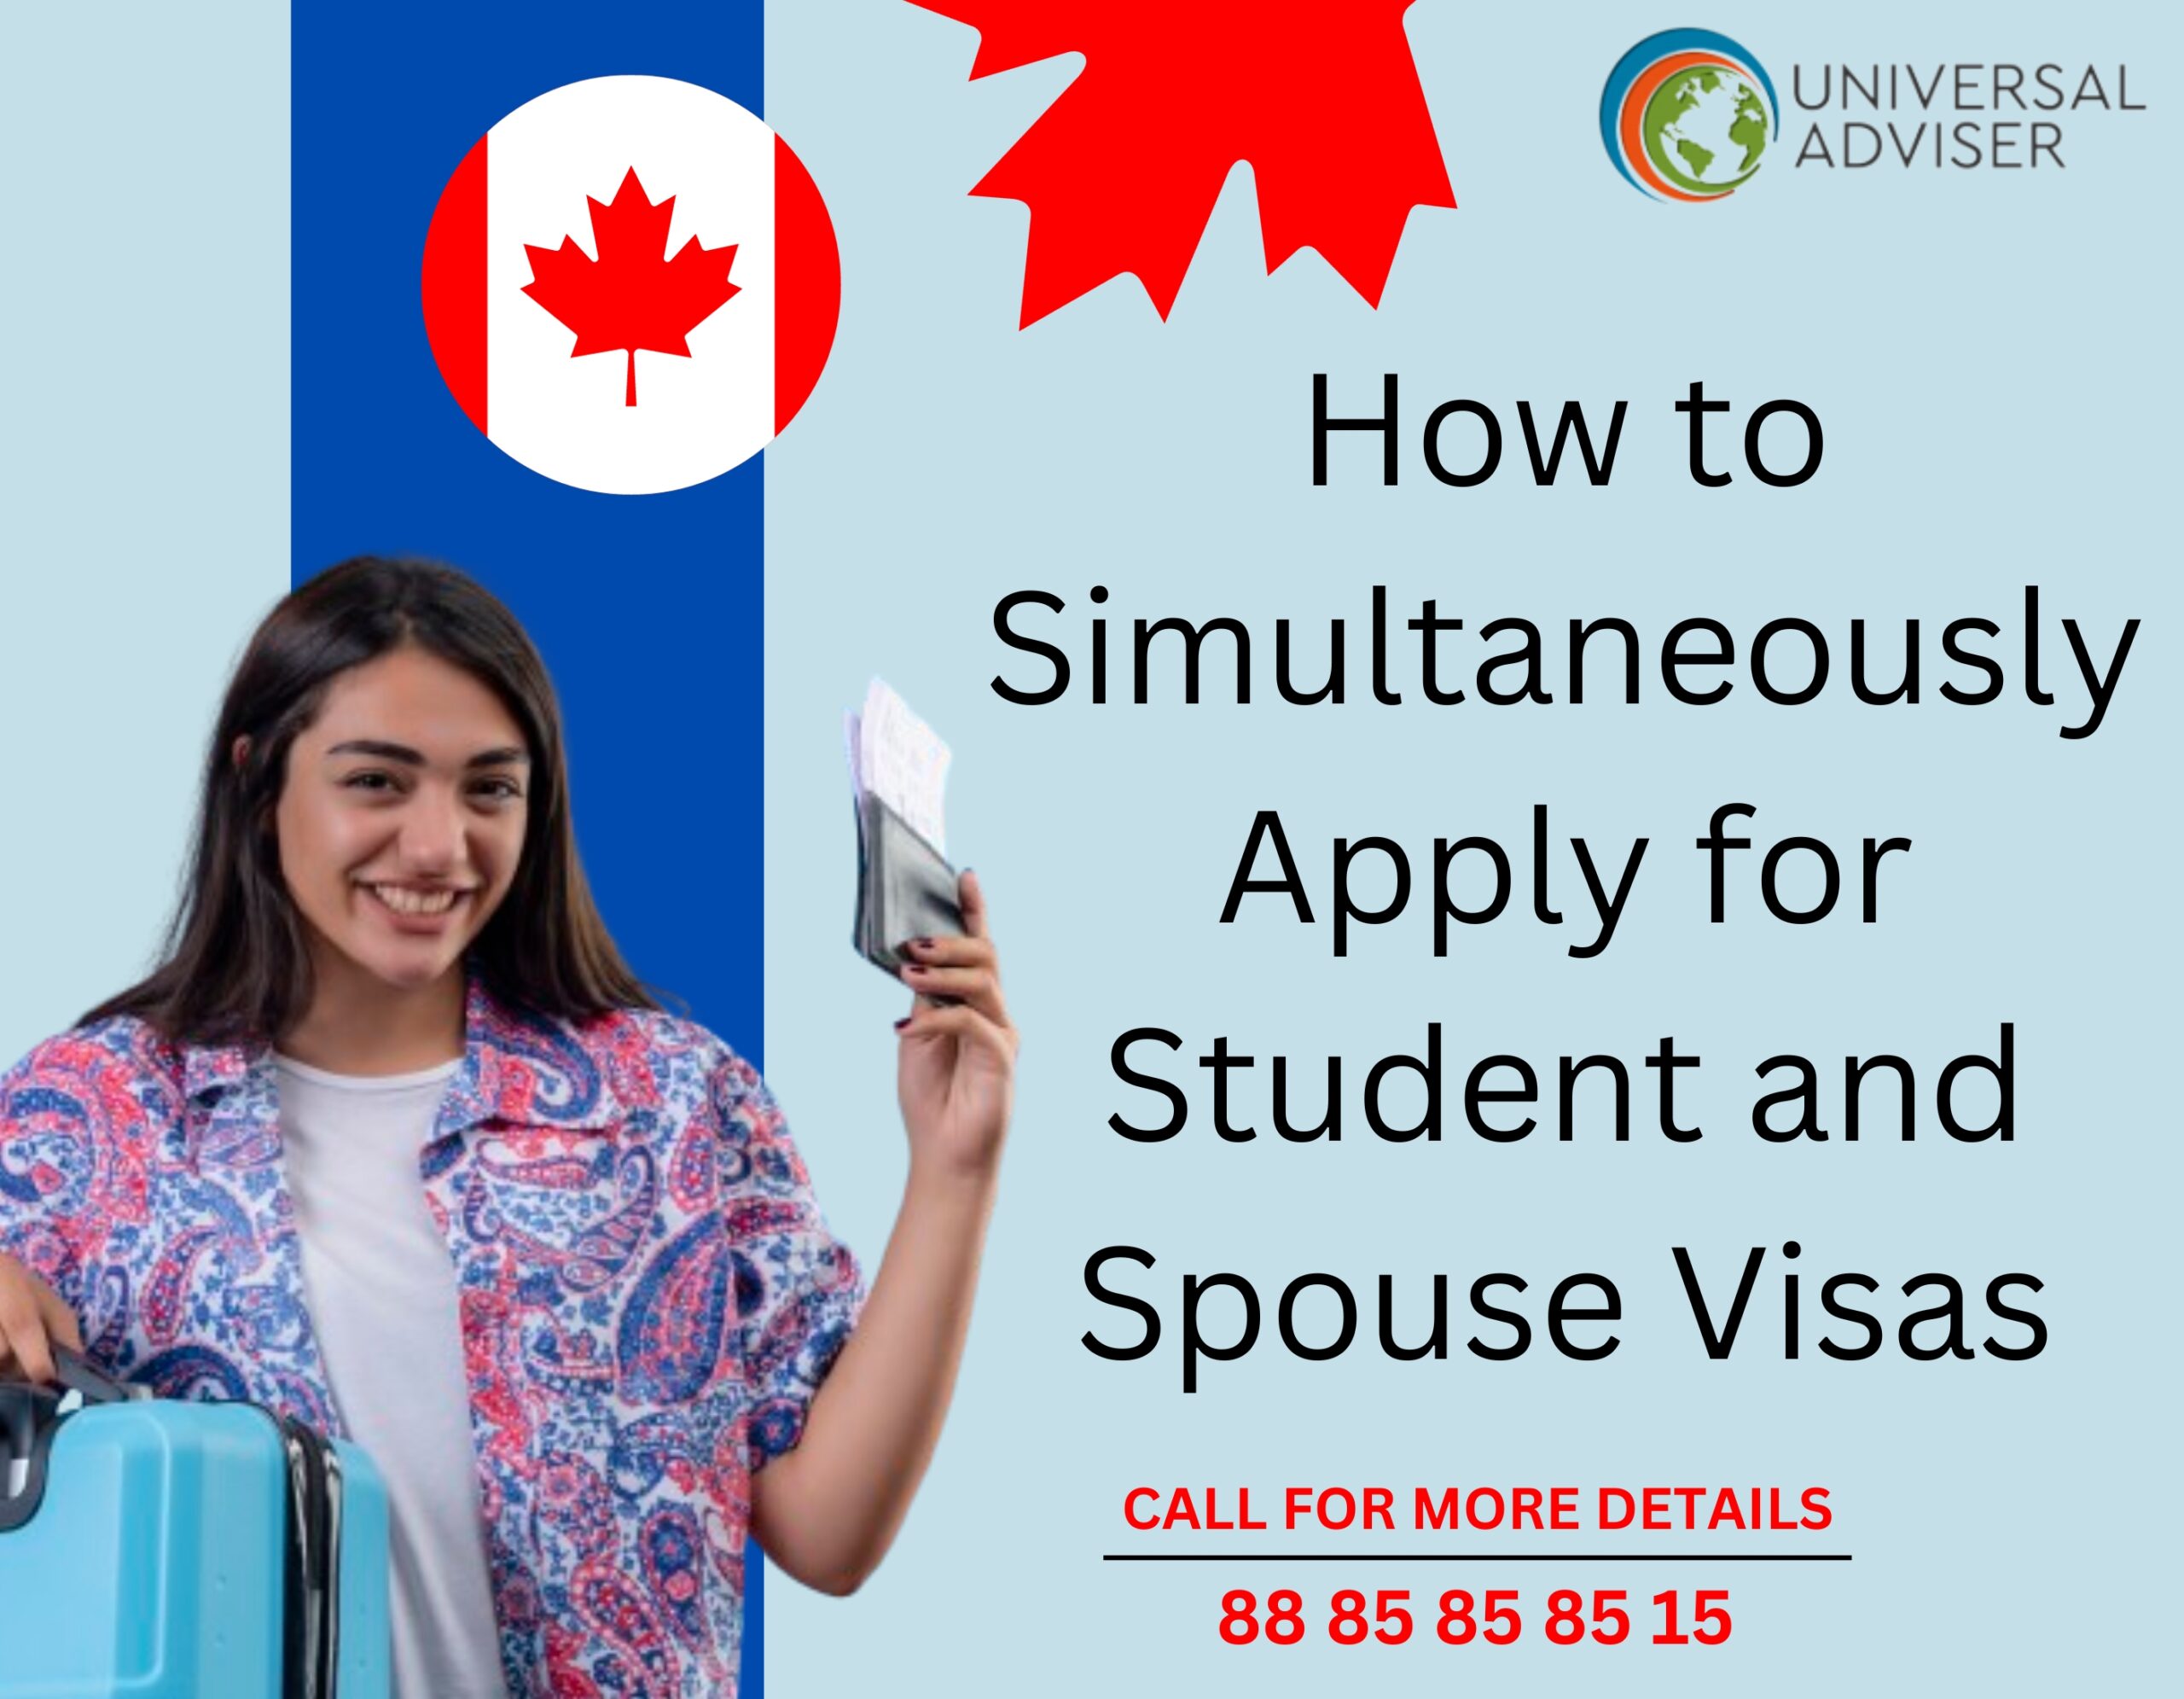 How to Simultaneously Apply for Student and Spouse Visas